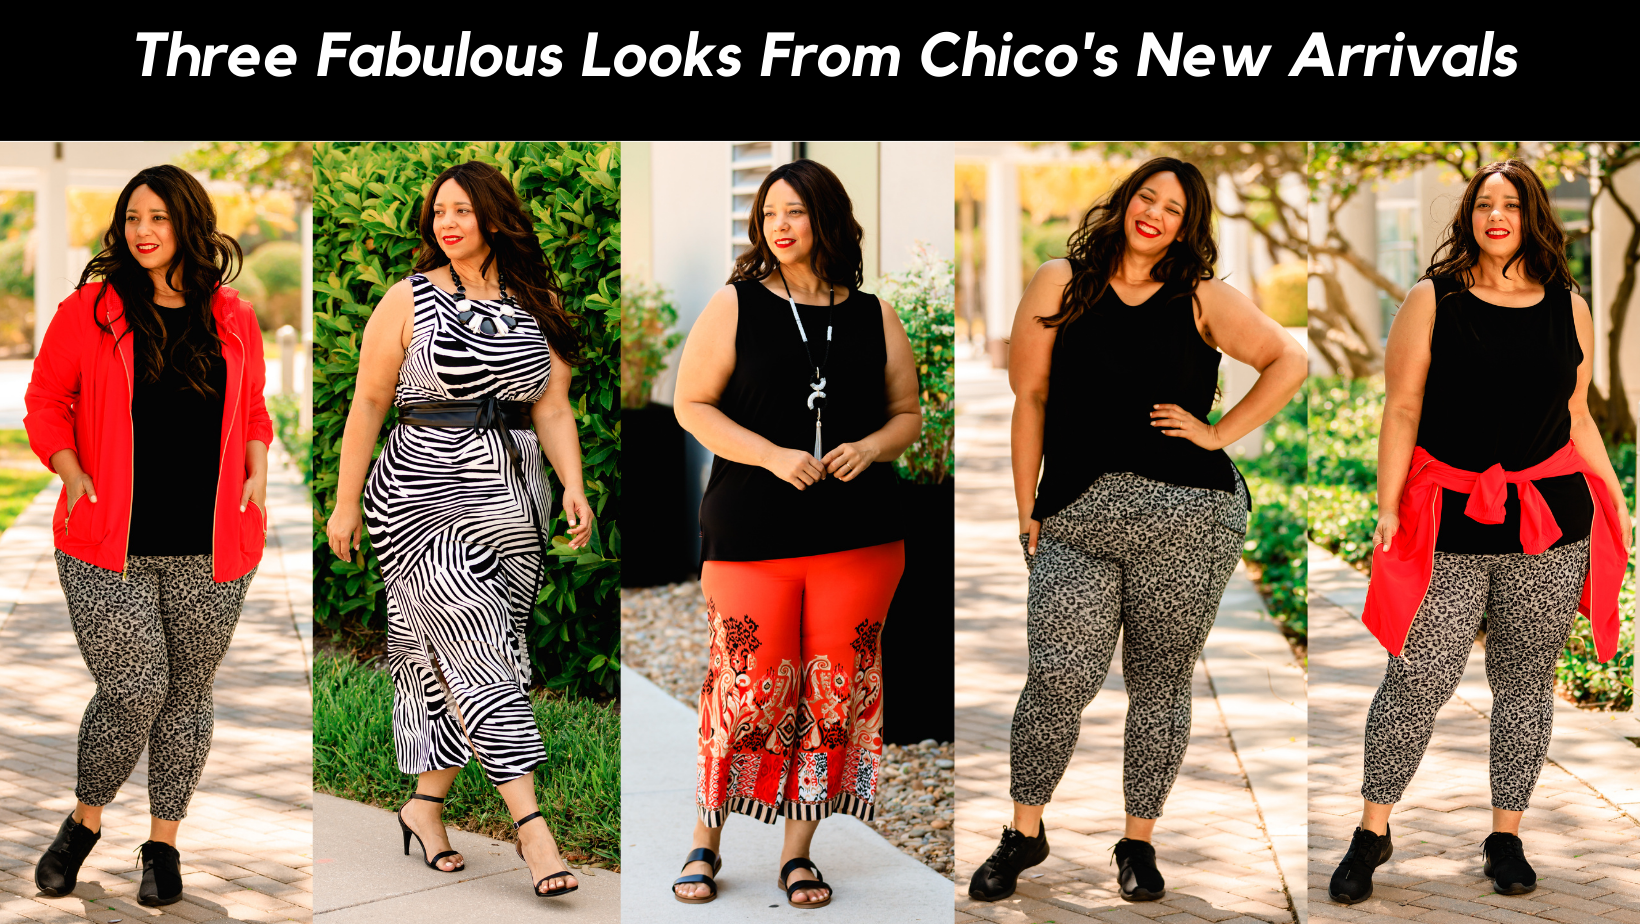 Three Fabulous Looks From Chico's New Arrivals